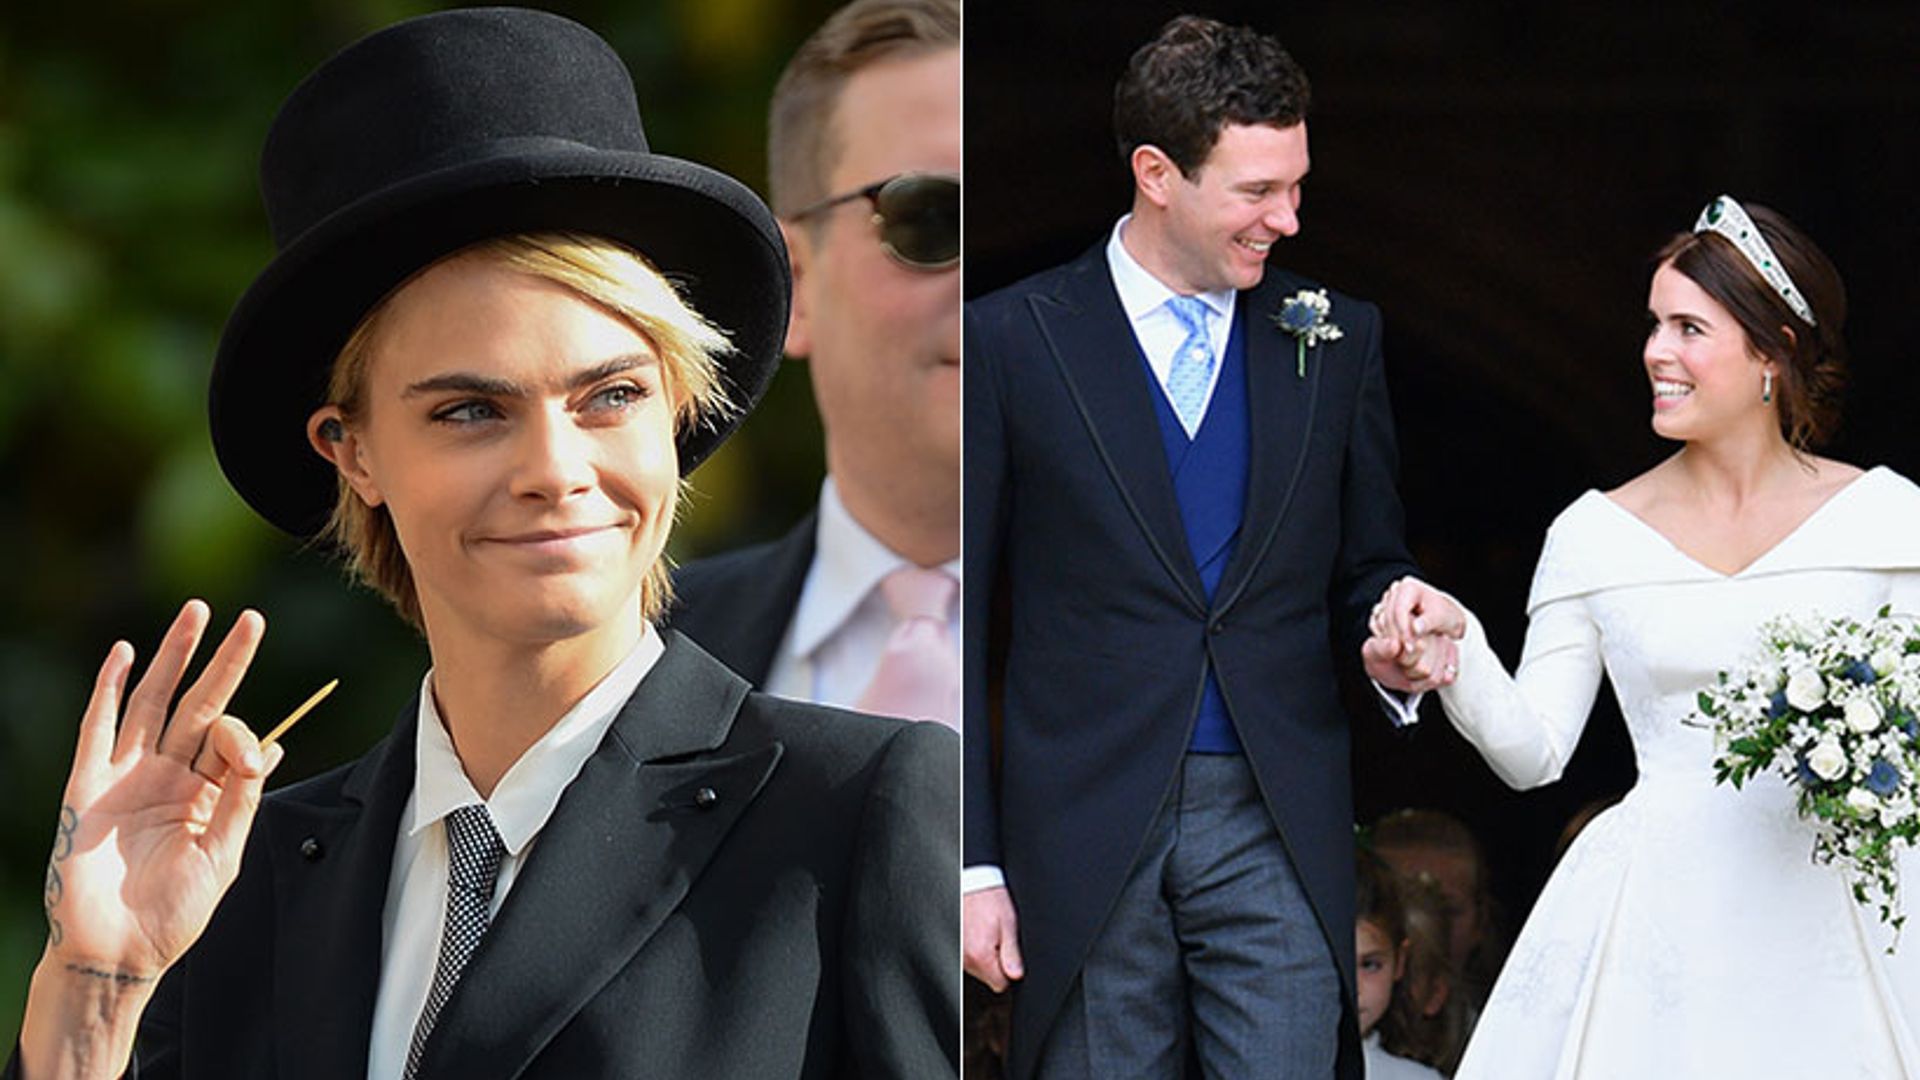 See Princess Eugenie's amazing response to Cara Delevingne's royal wedding outfit